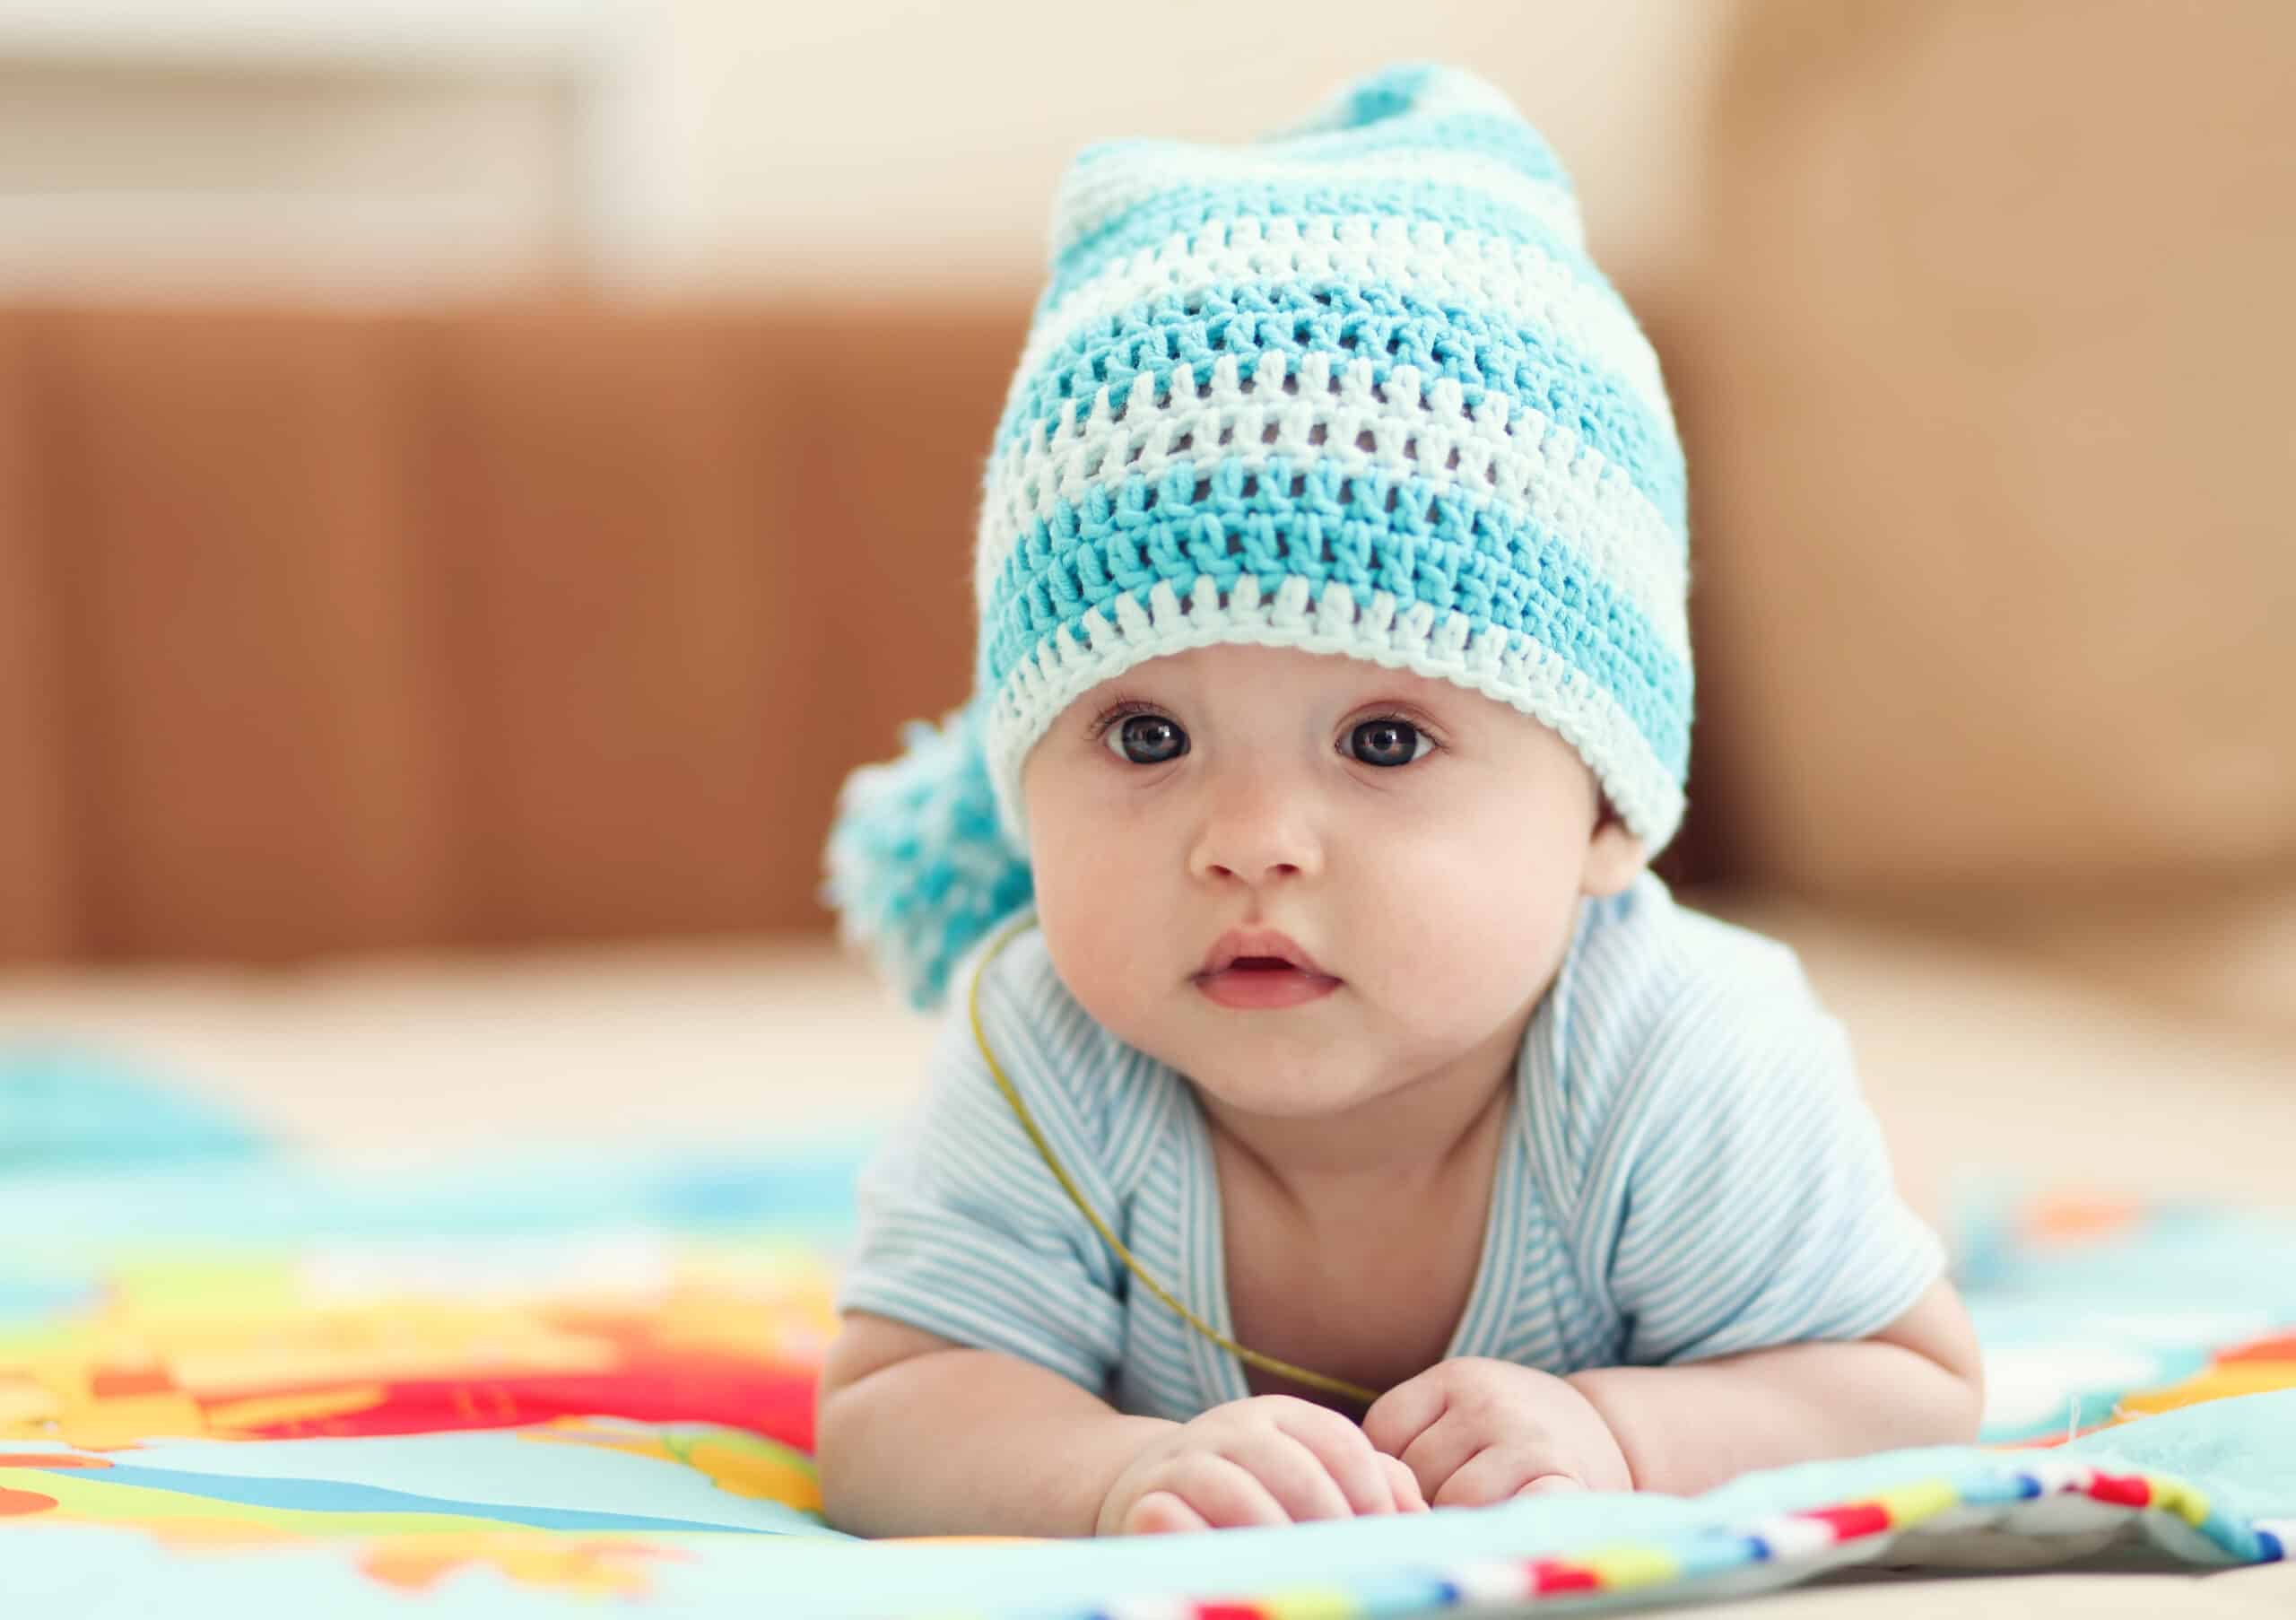 little child lying on a children's rug in the white-blue cap. Small Depth of Field (DOF)